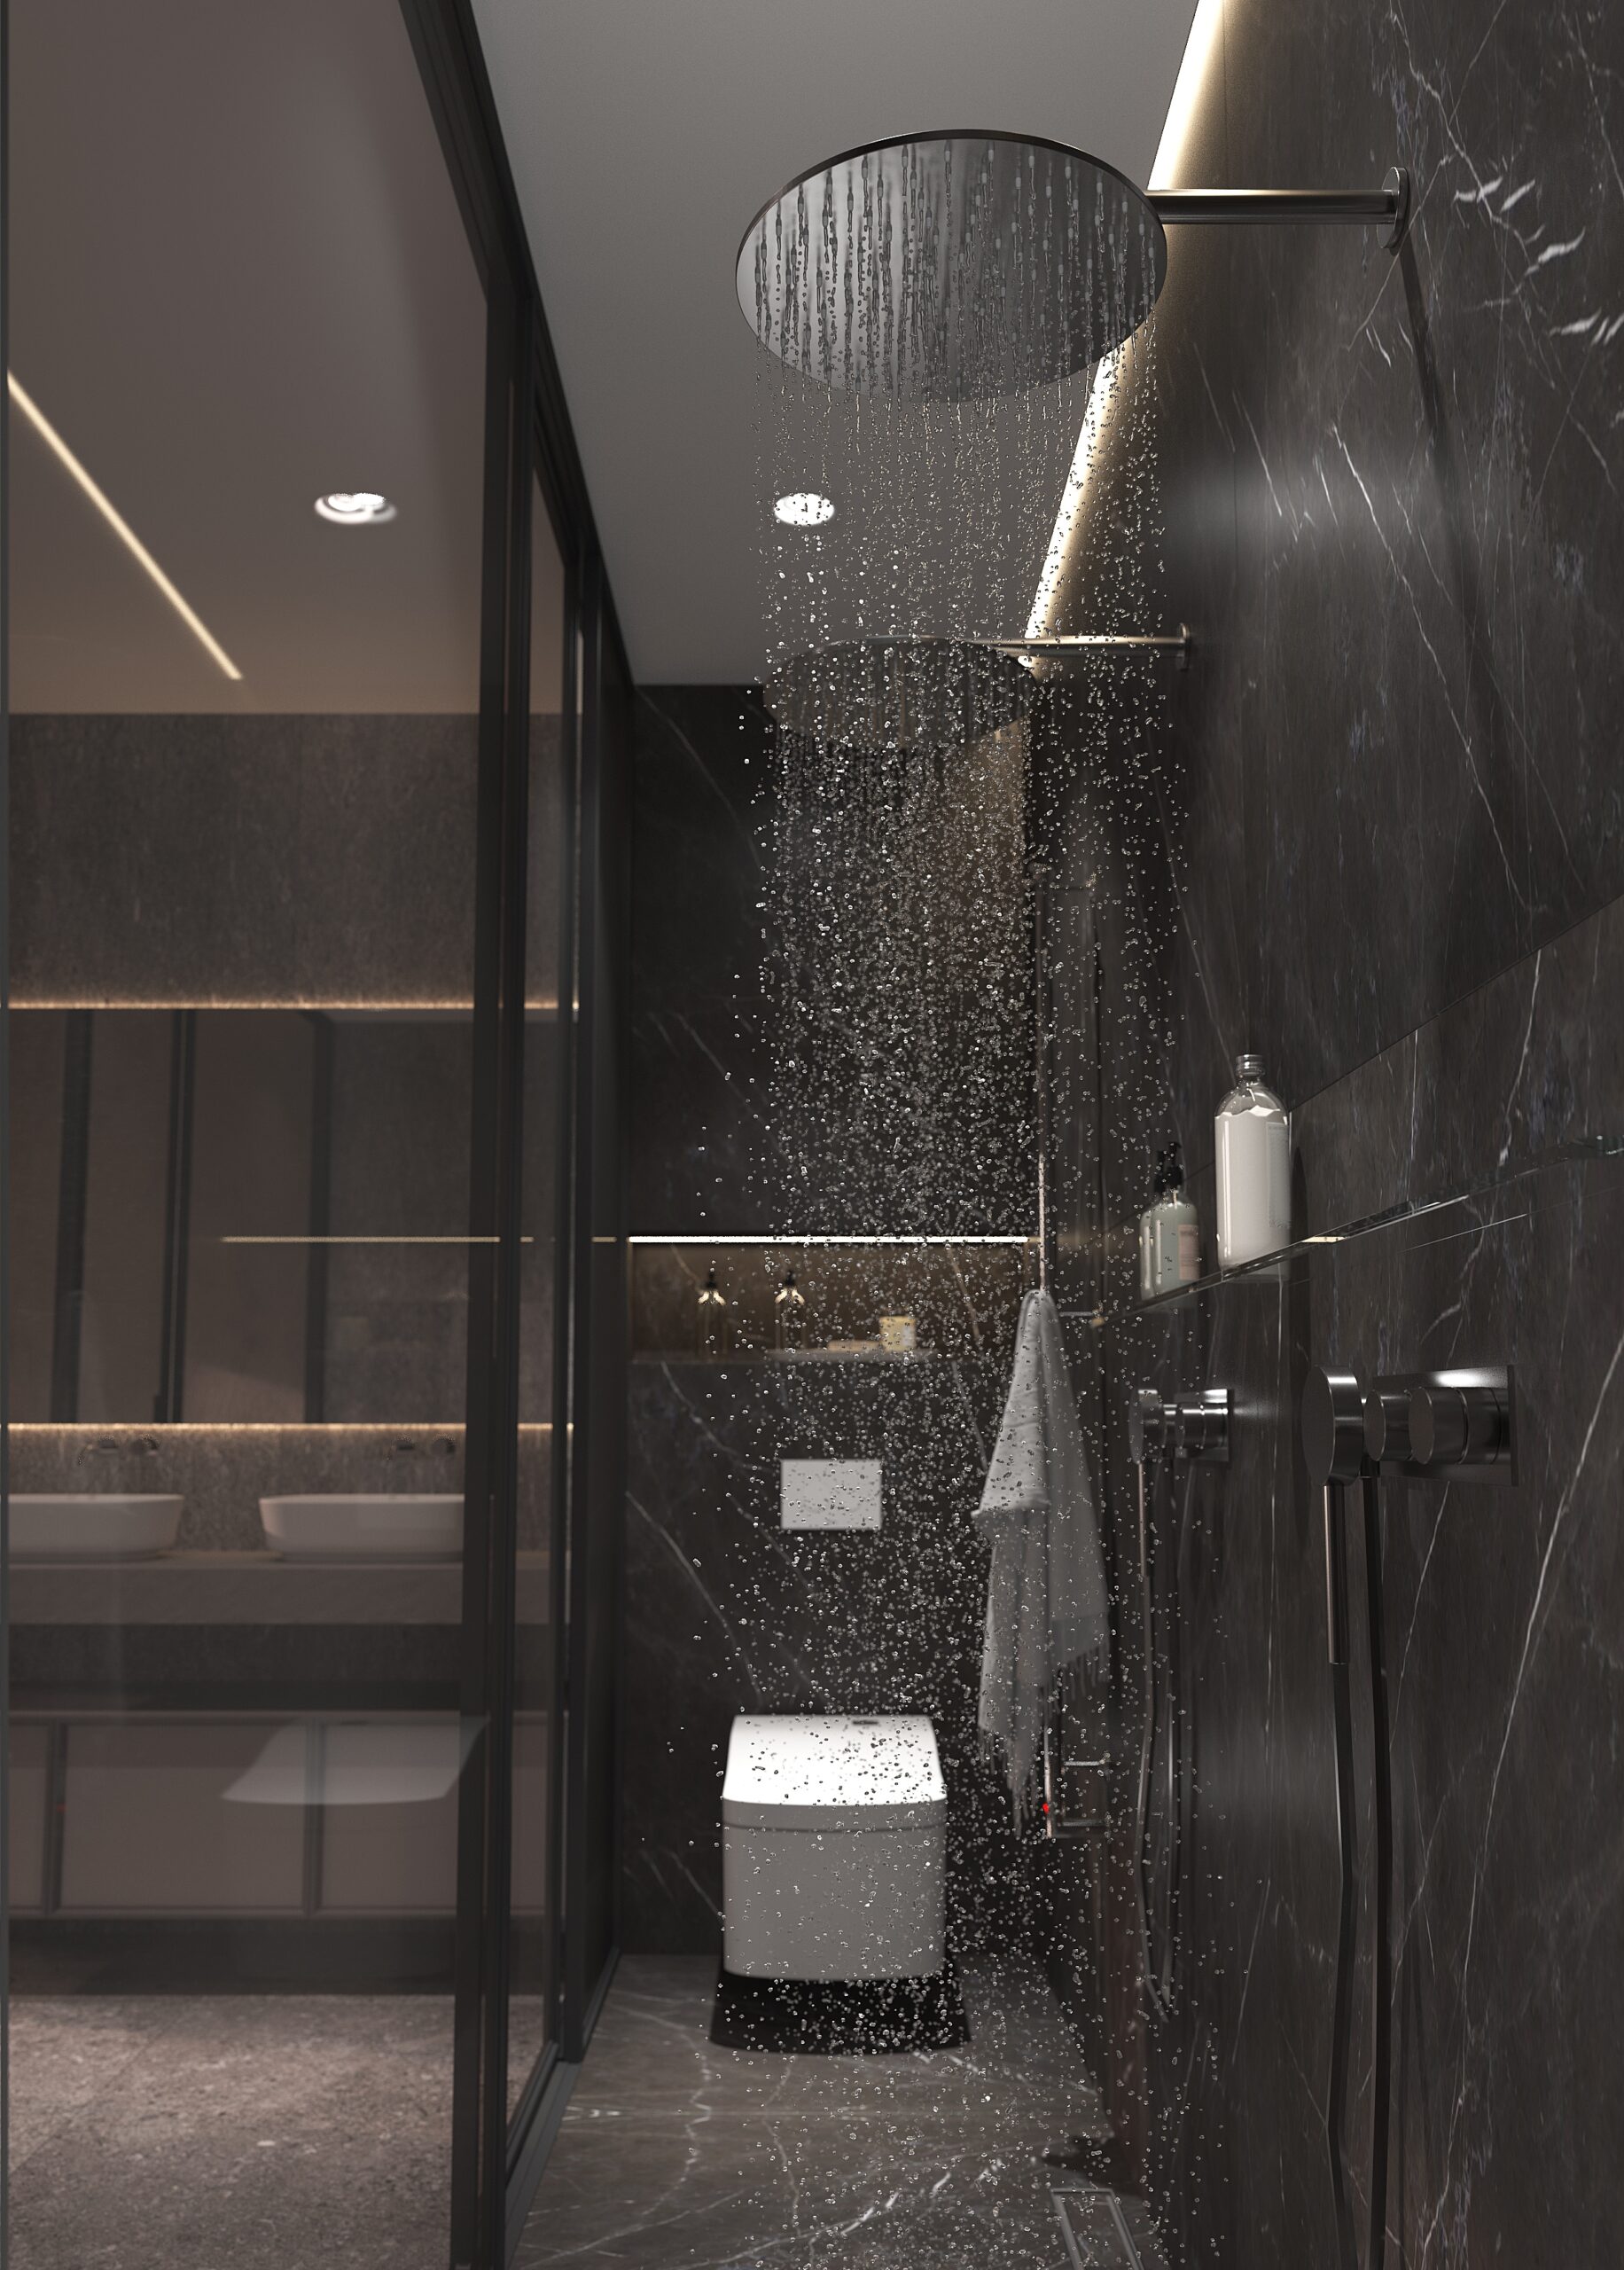 Double your shower pleasure with dual heads for a luxe experience, paired with sleek, modern fixtures.